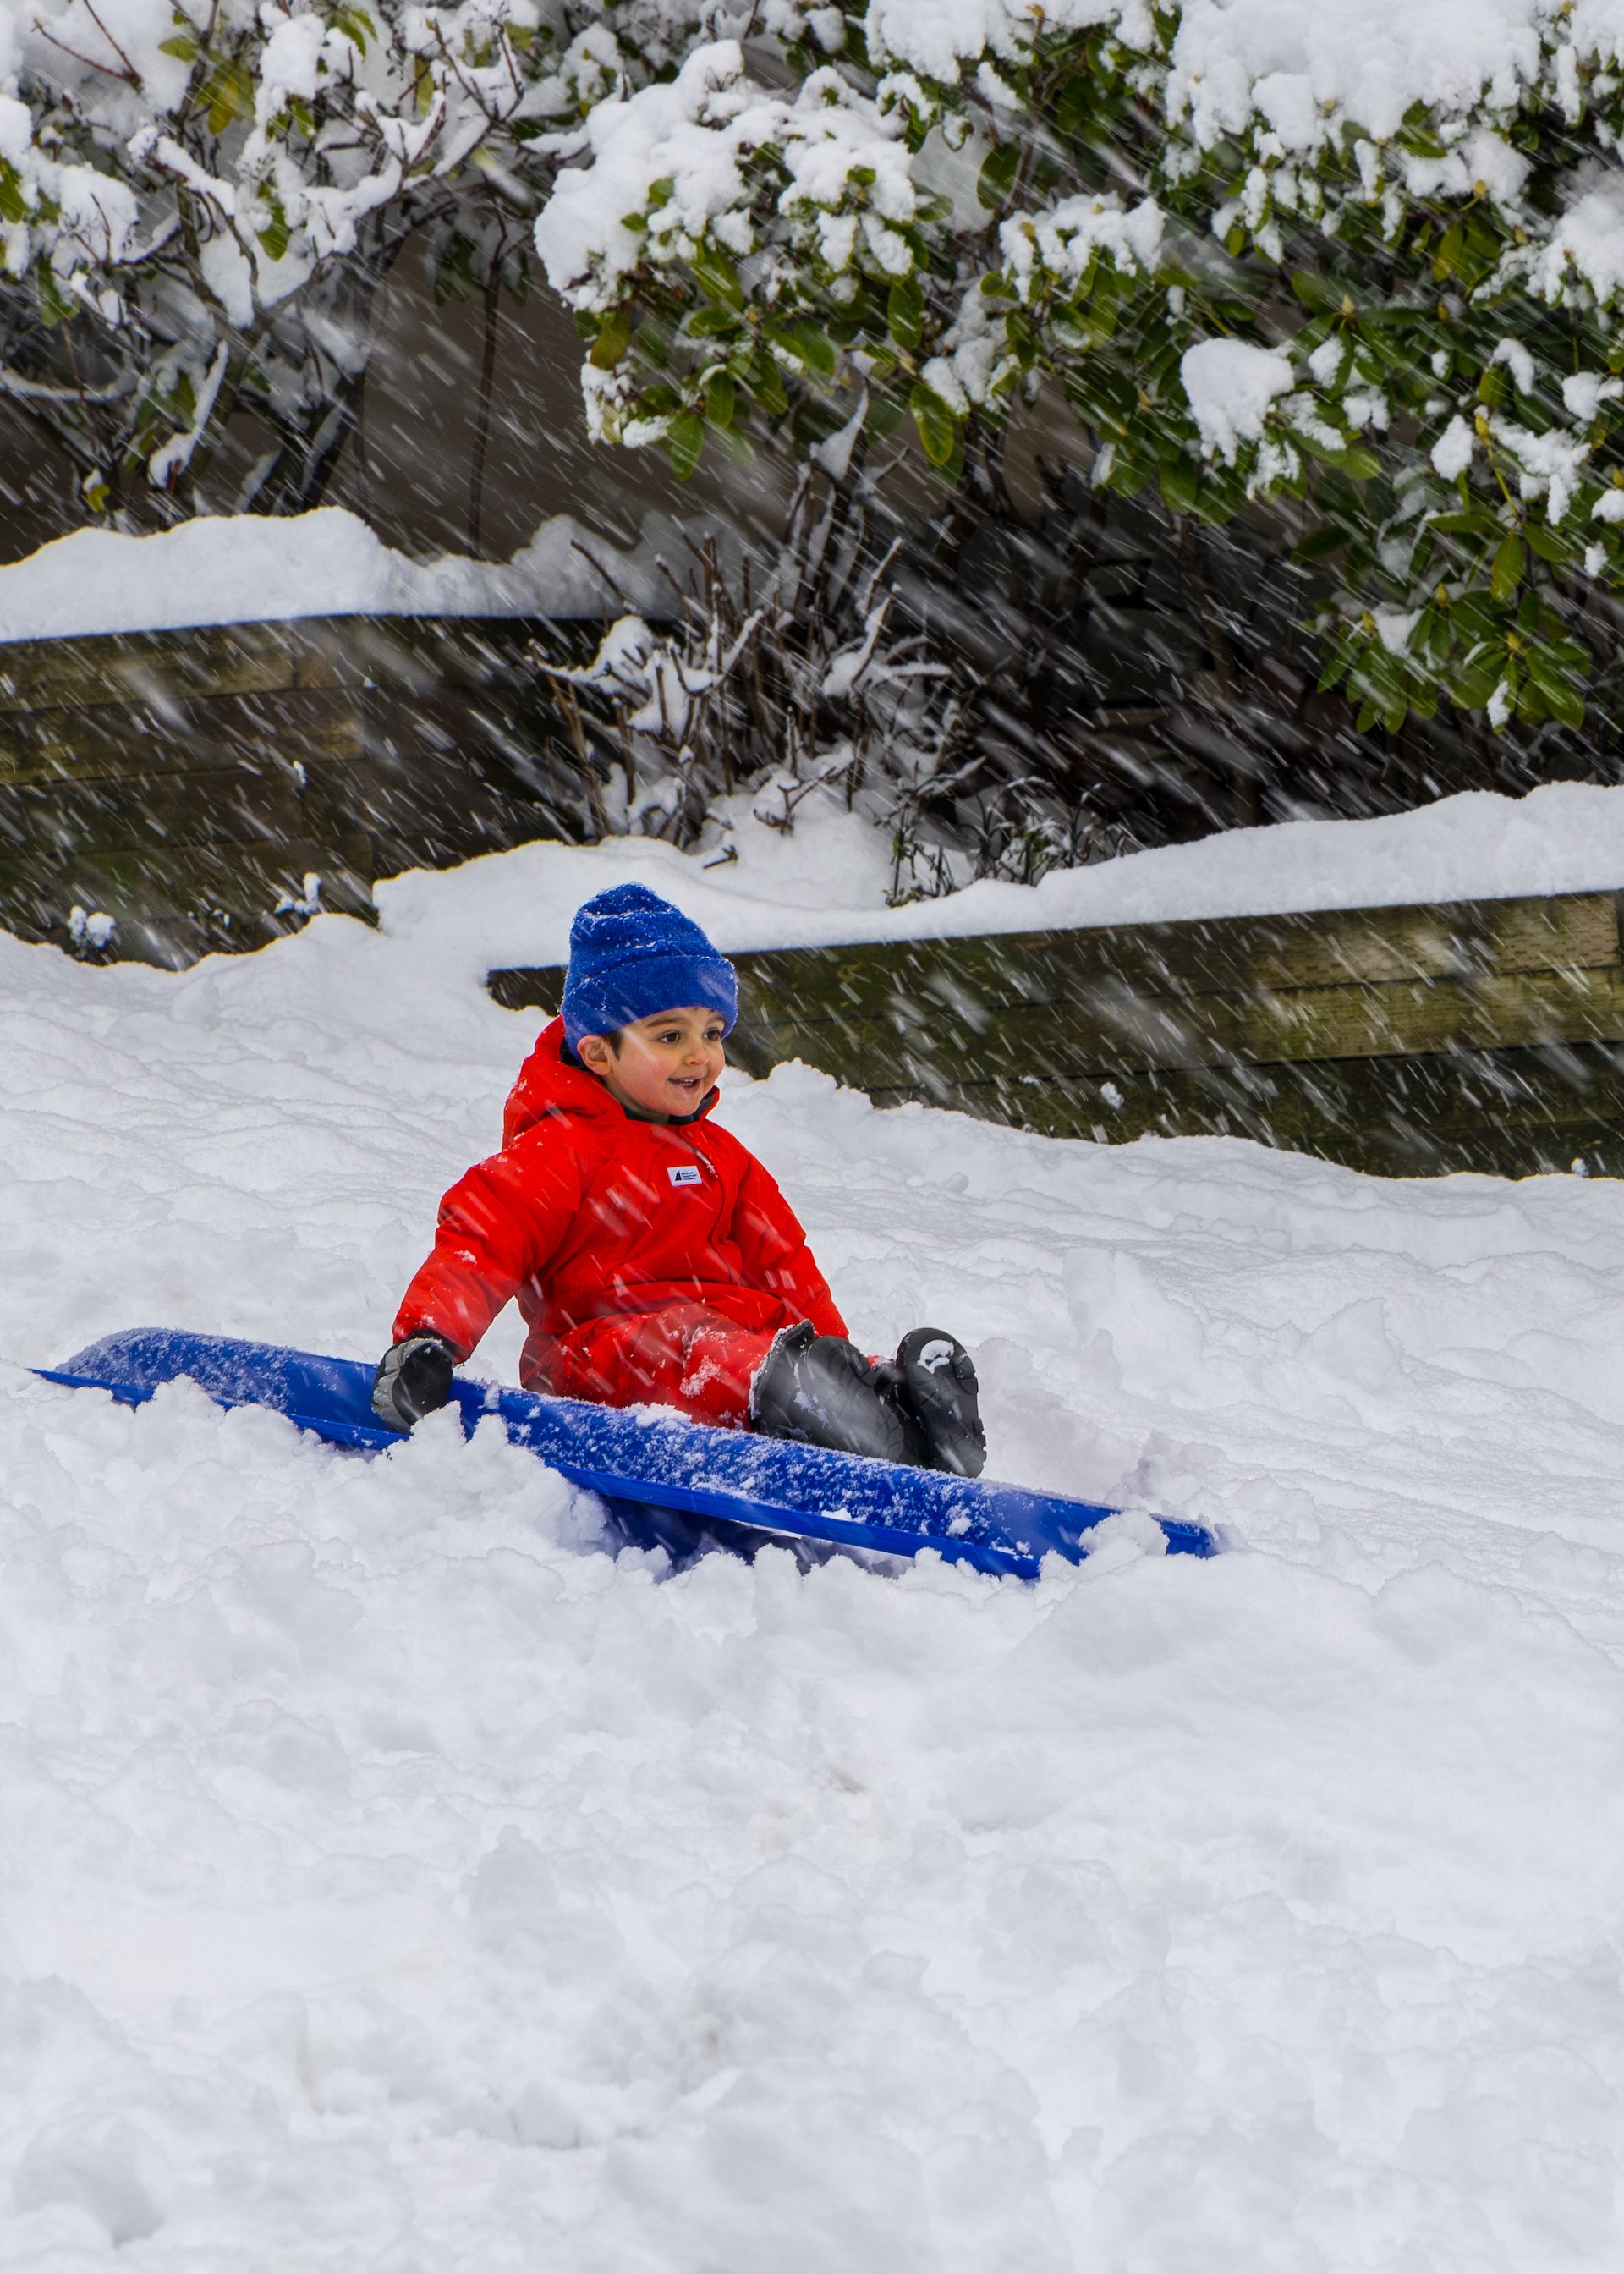  Brin, our next door neighbour, was really enjoying the day and doing some tobogganing.  